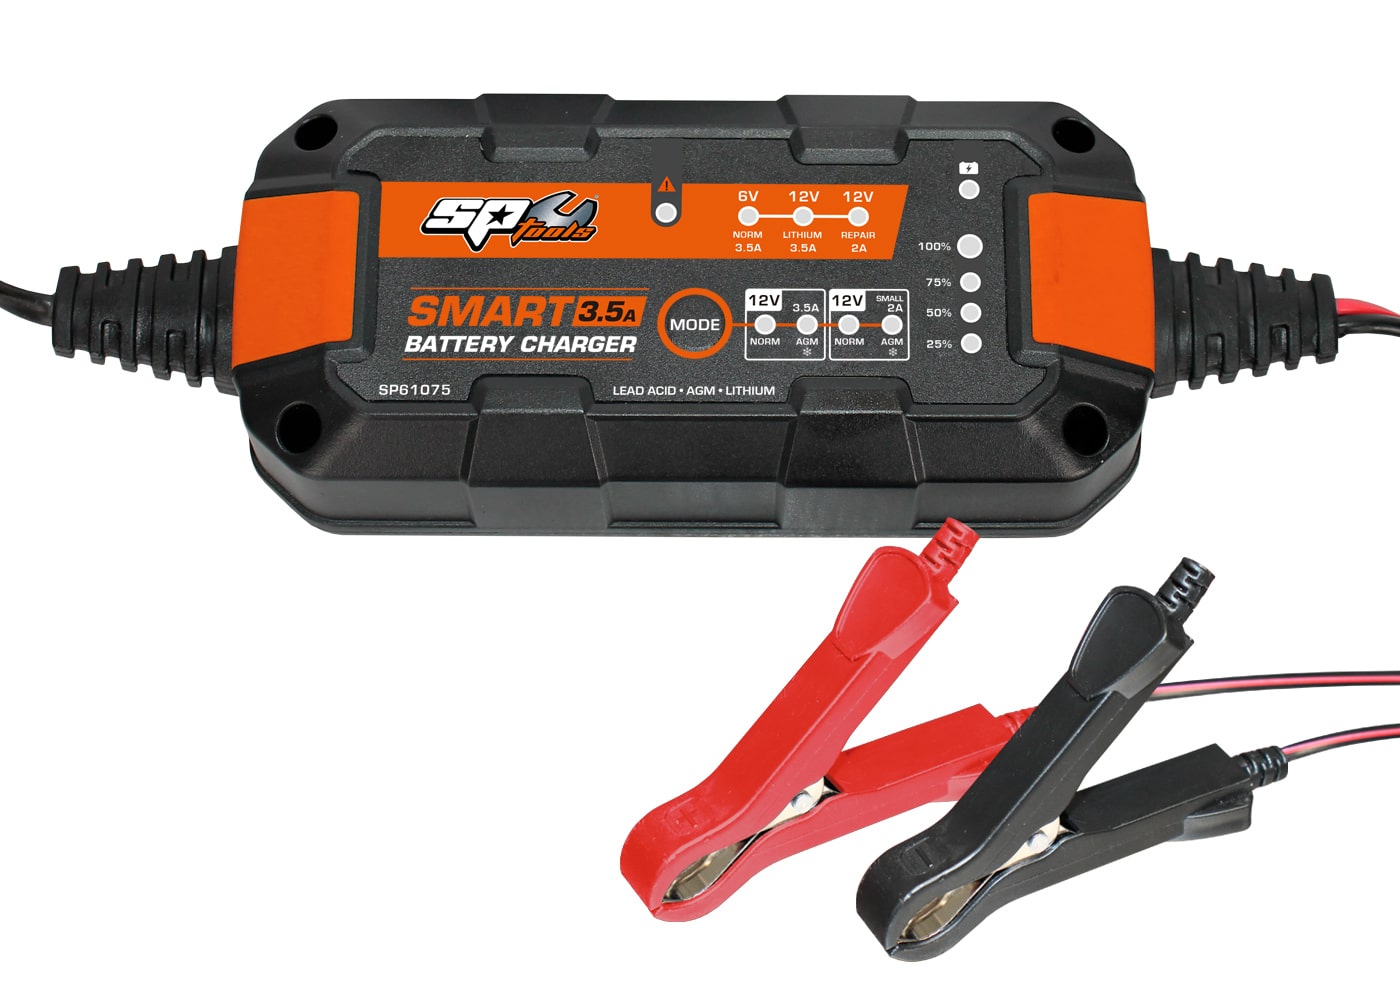 CHARGER BATTERY 3.5 AMP 8 STAGE